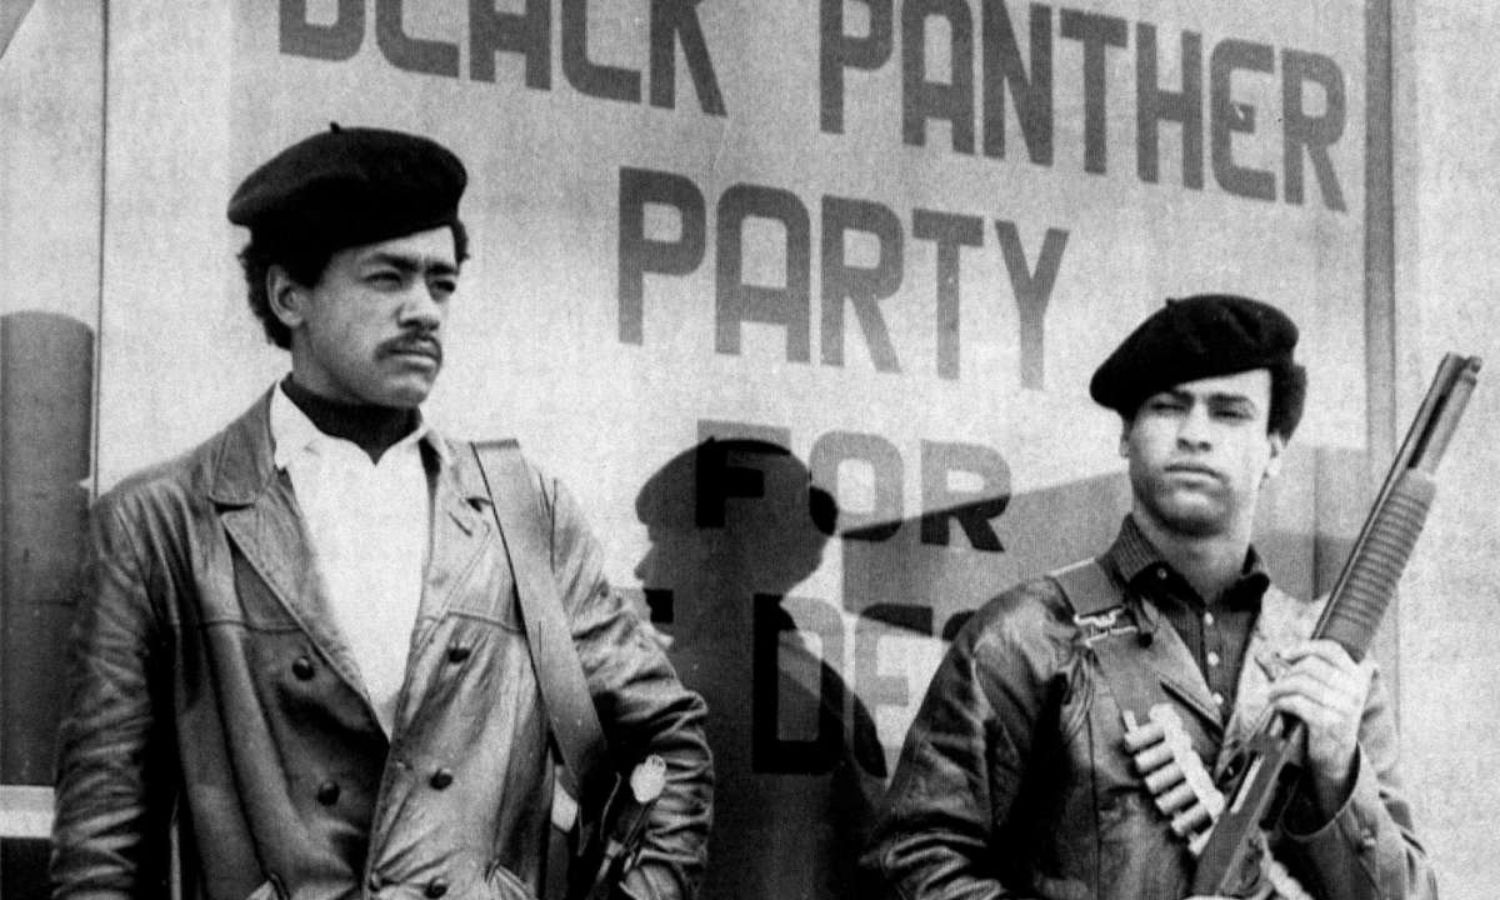 OTD in 1966: Huey P. Newton and Bobby Seale founded the Black-rights political organization